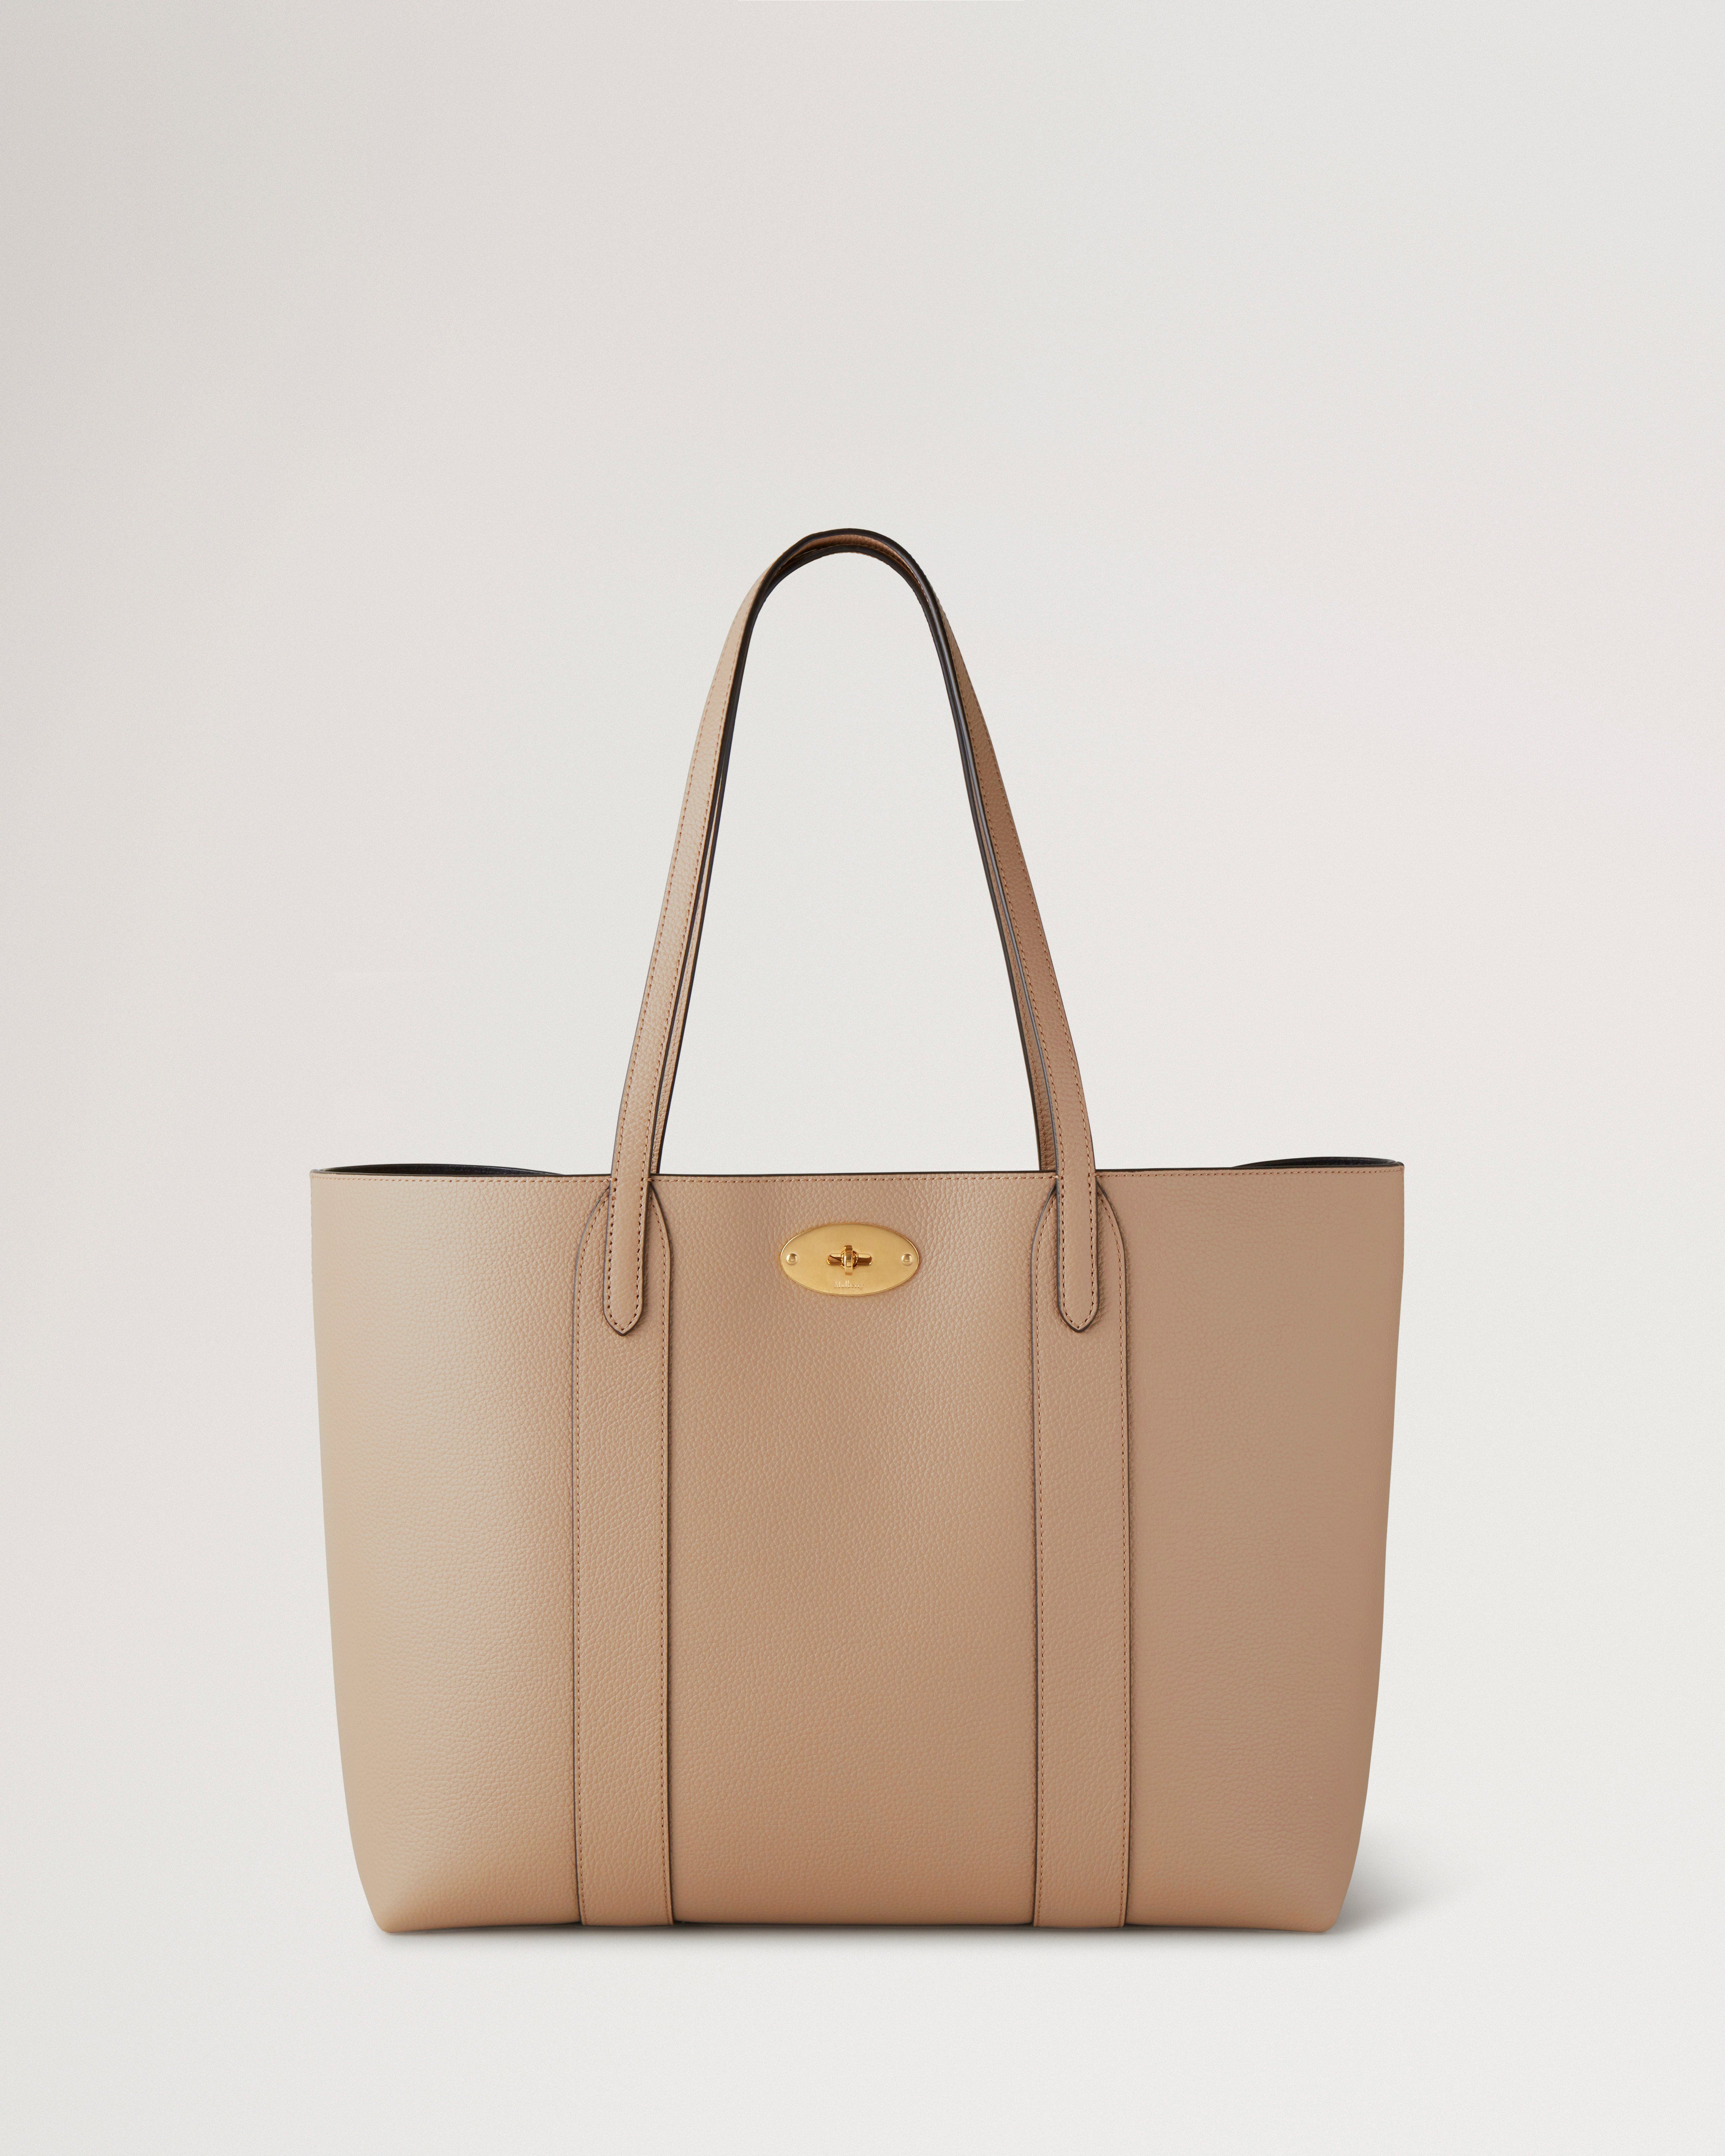 Mulberry Bayswater tote in maple